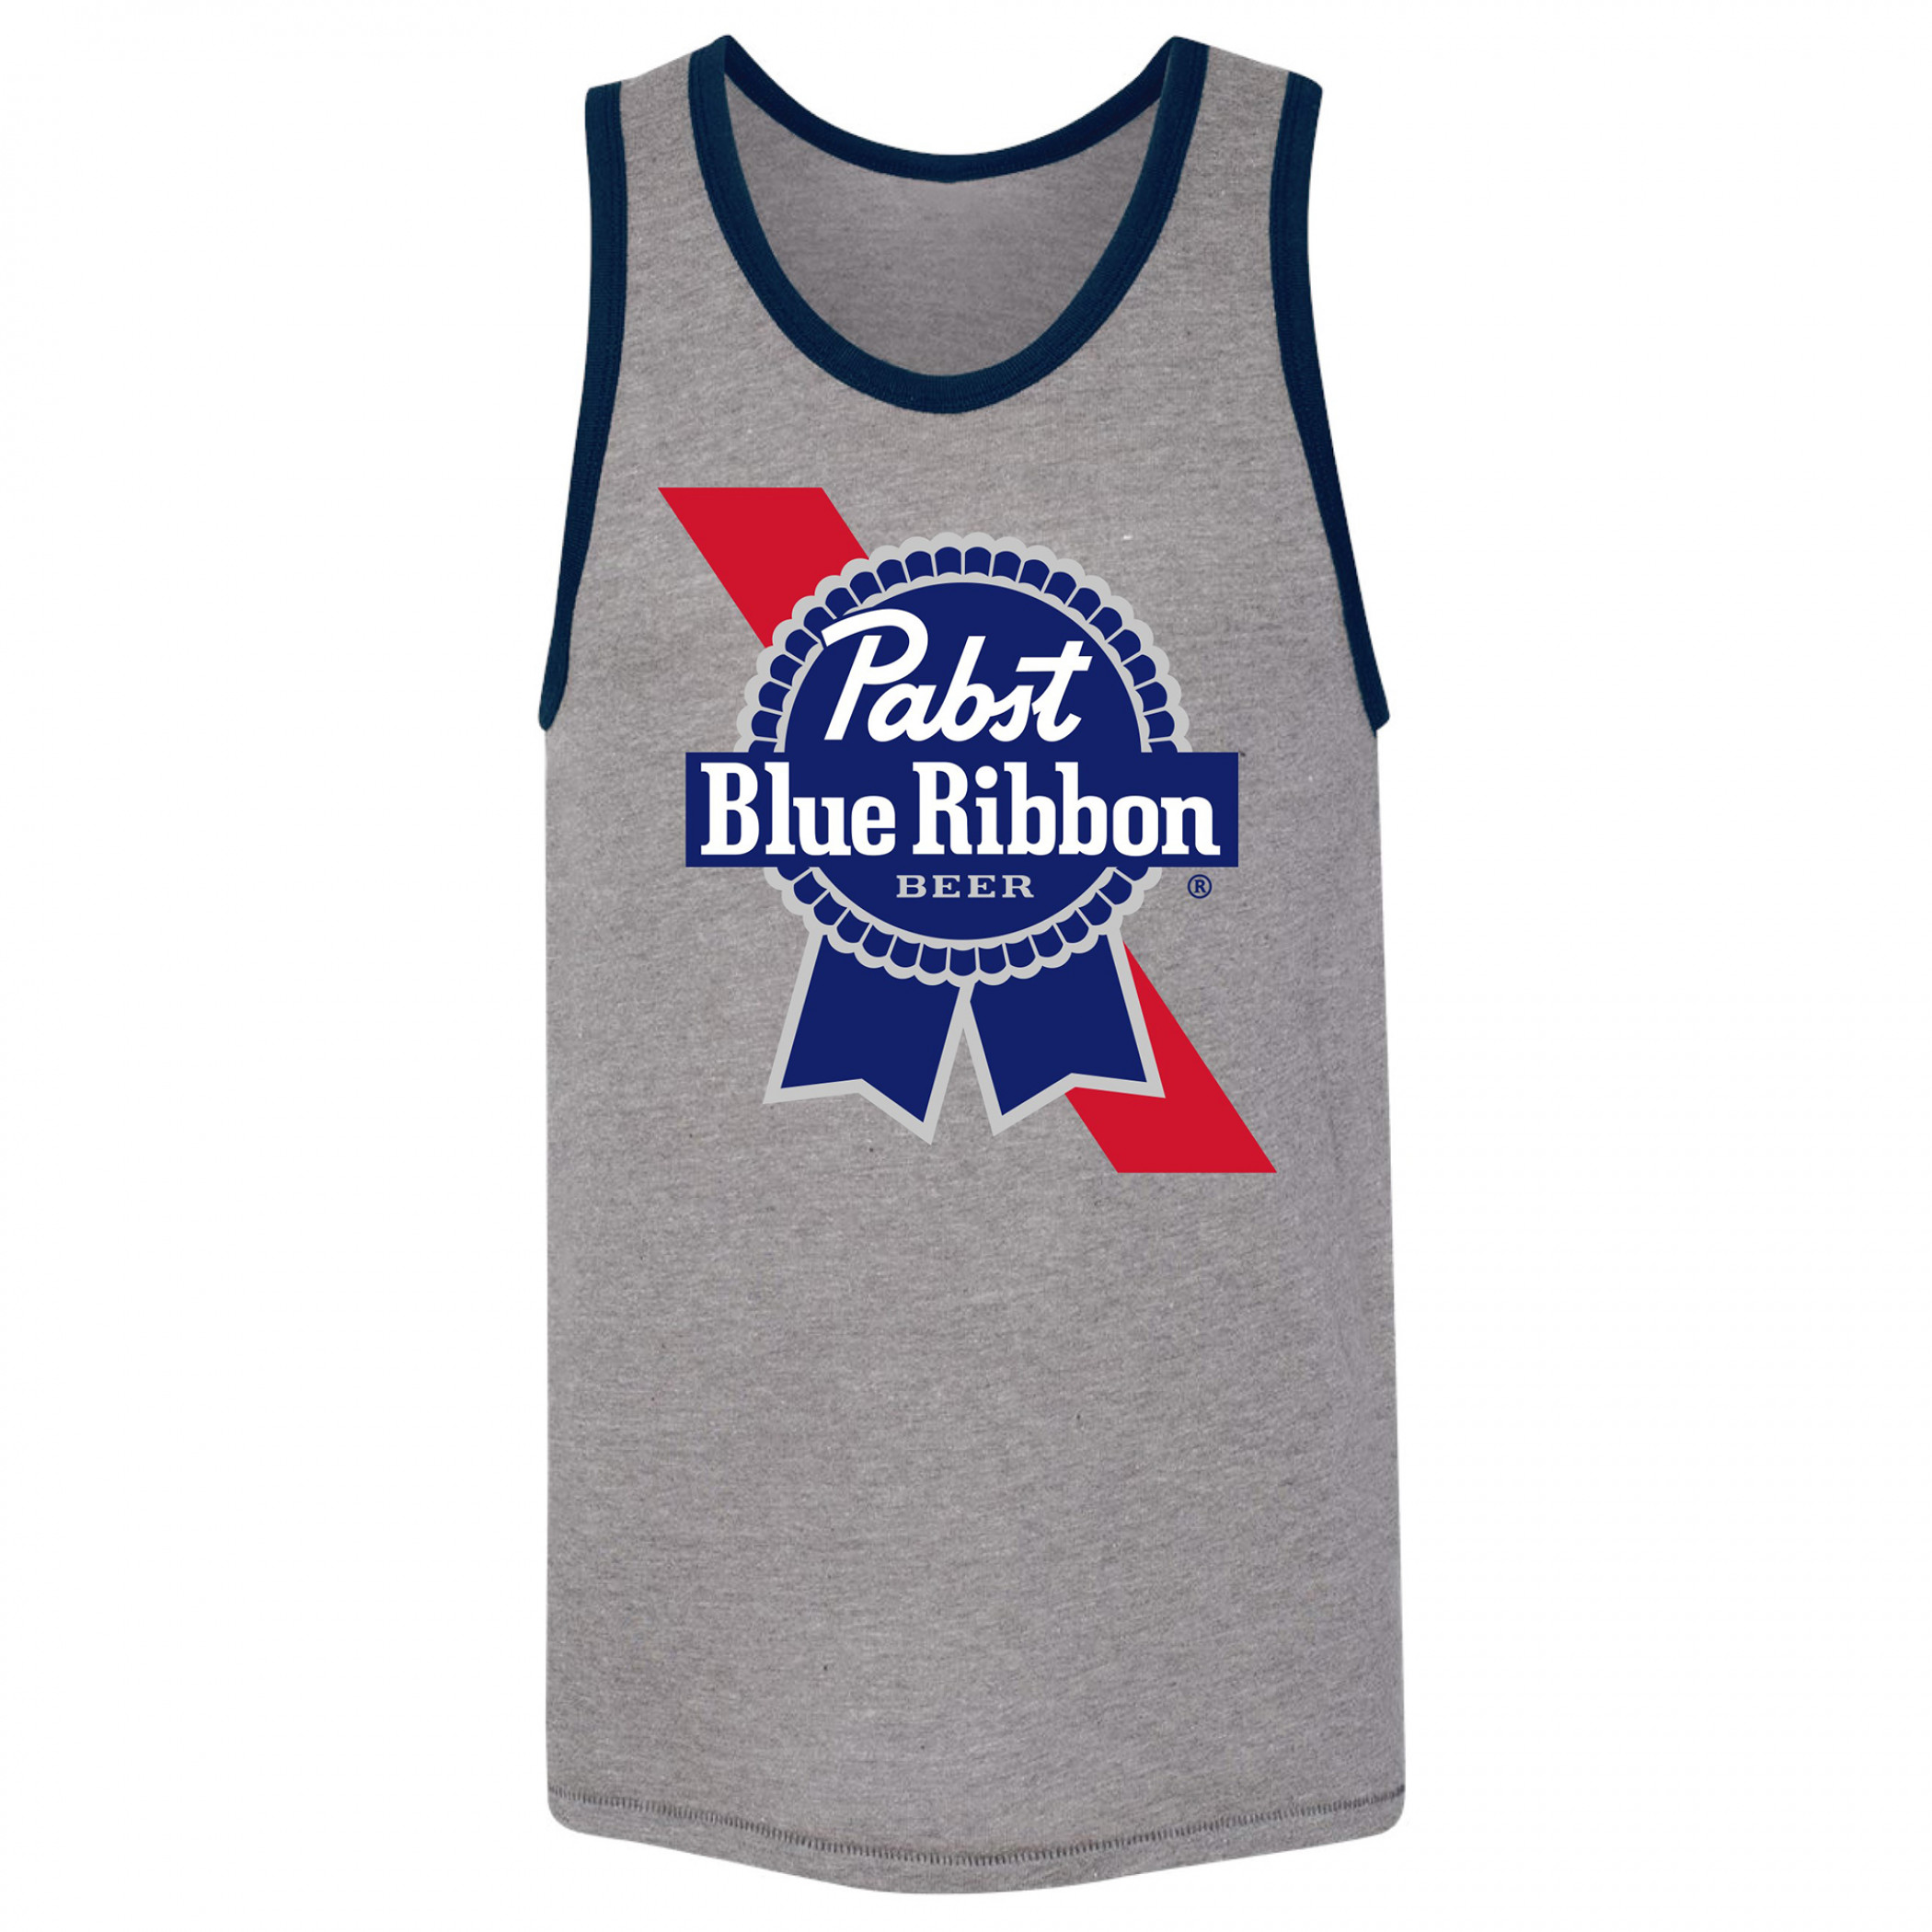 Pabst Blue Ribbon Label & Logo with Blue Trim Grey Tank Top